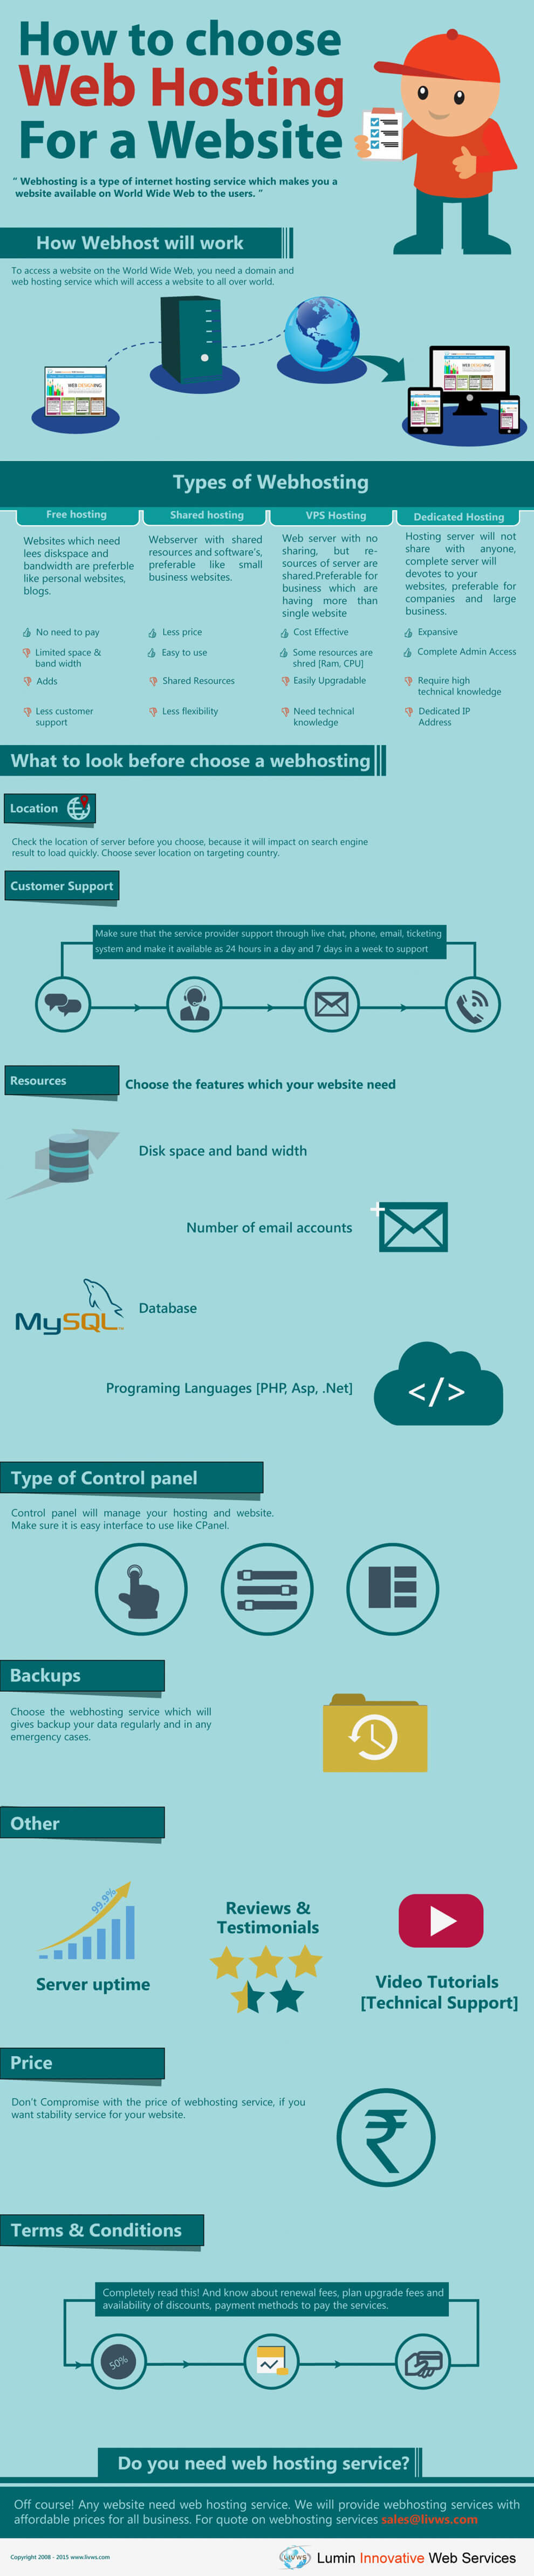 How to Choose Web Hosting Plan for a Website INIFOGRAPHIC